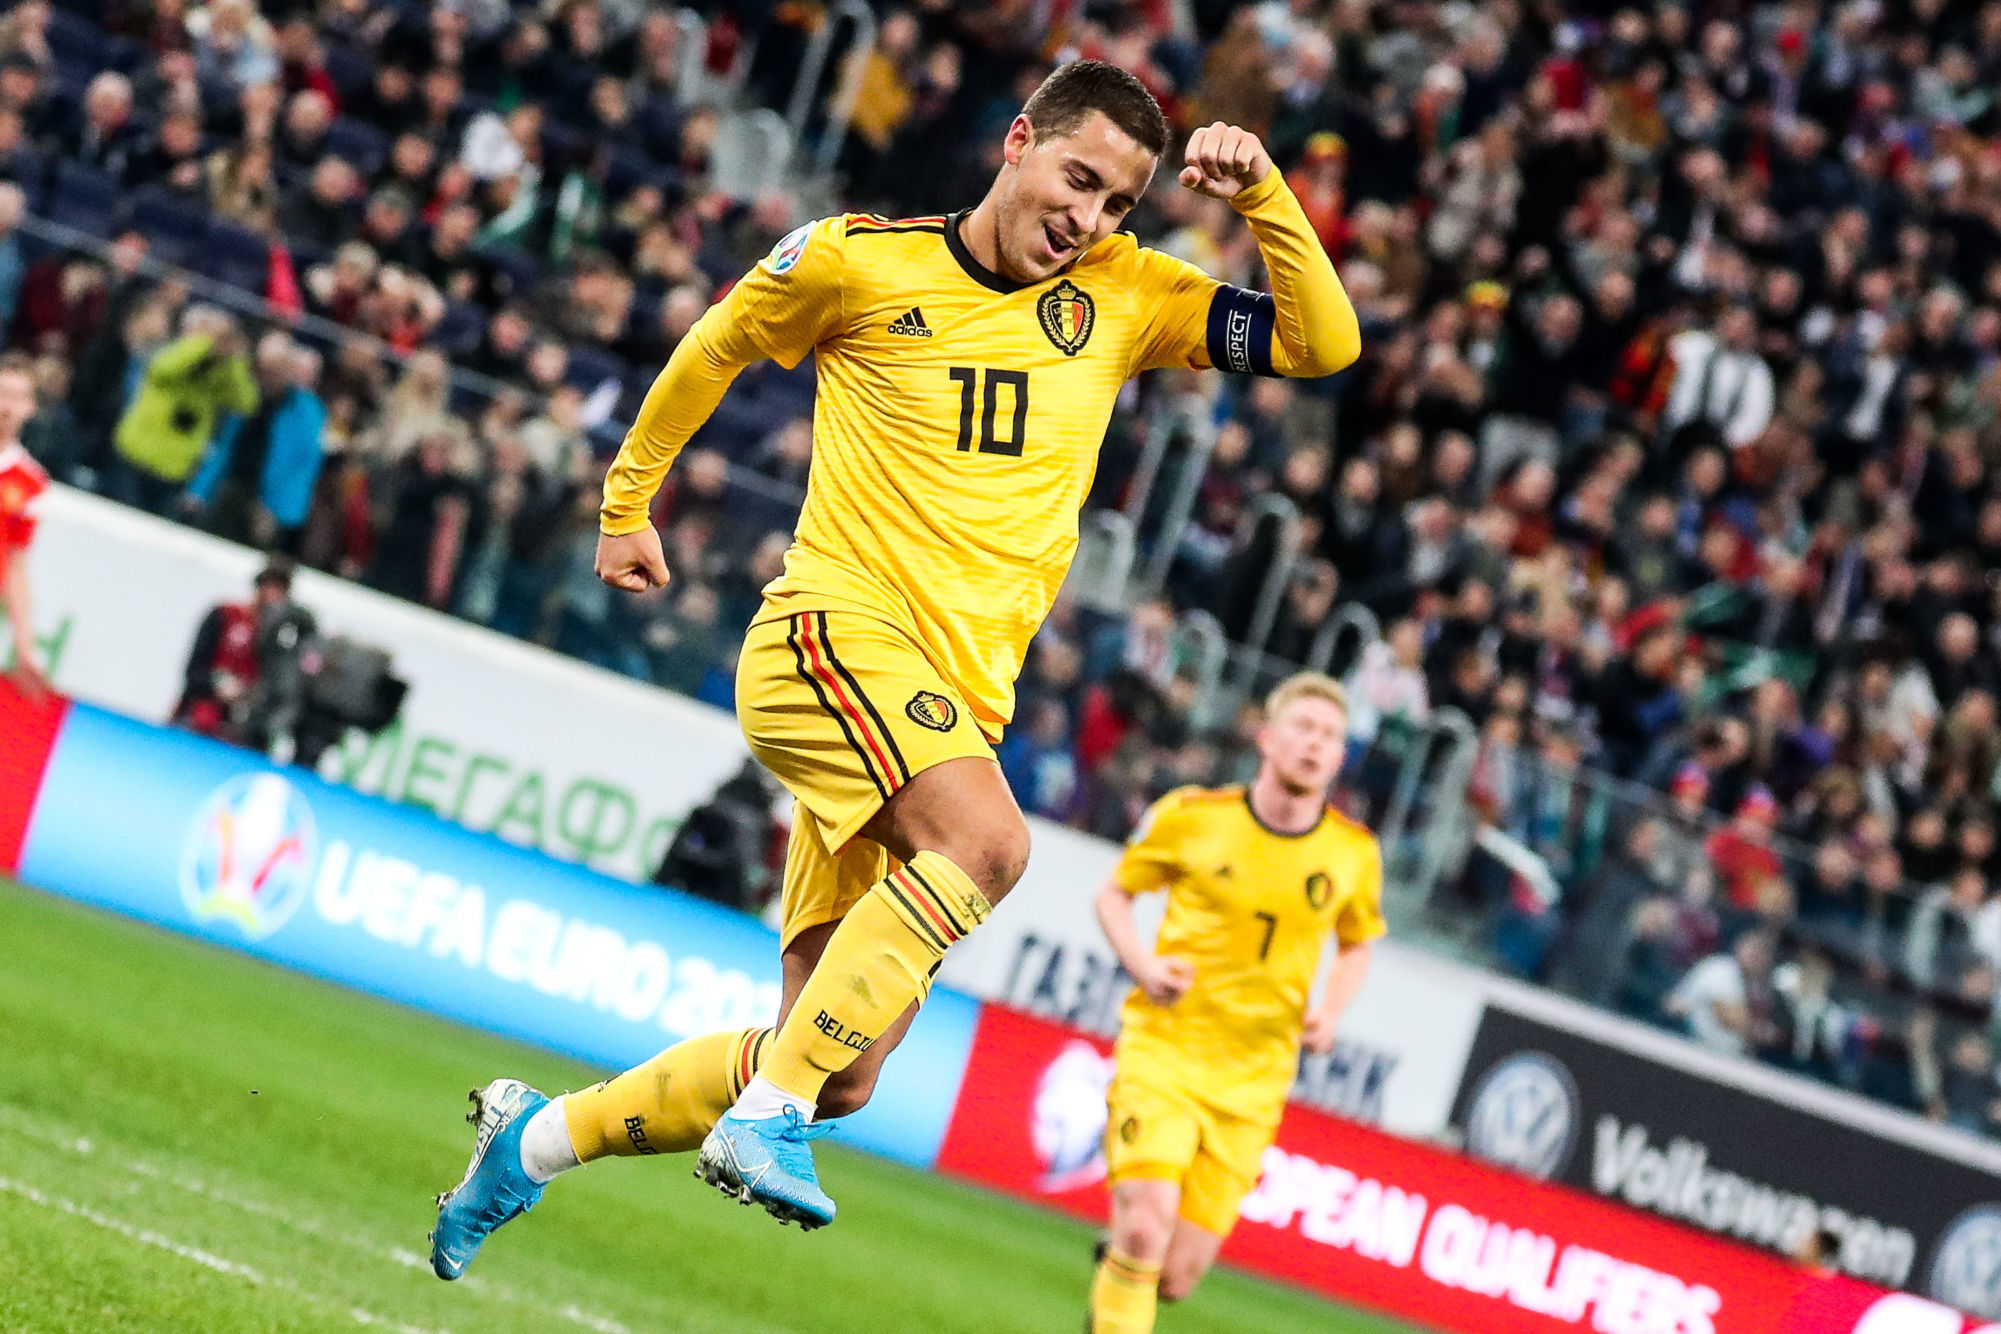 Belgium's Eden Hazard celebrates after scoring the 0-2 goal during the match of the Belgian national soccer team the Red Devils against Russia, Saturday 16 November 2019, in Saint-Petersburg, Russia, a qualification game for the Euro2020 tournament.
BELGA PHOTO BRUNO FAHY 
Photo by Icon Sport - Stade Krestovski - Saint Petersbourg (Russie)